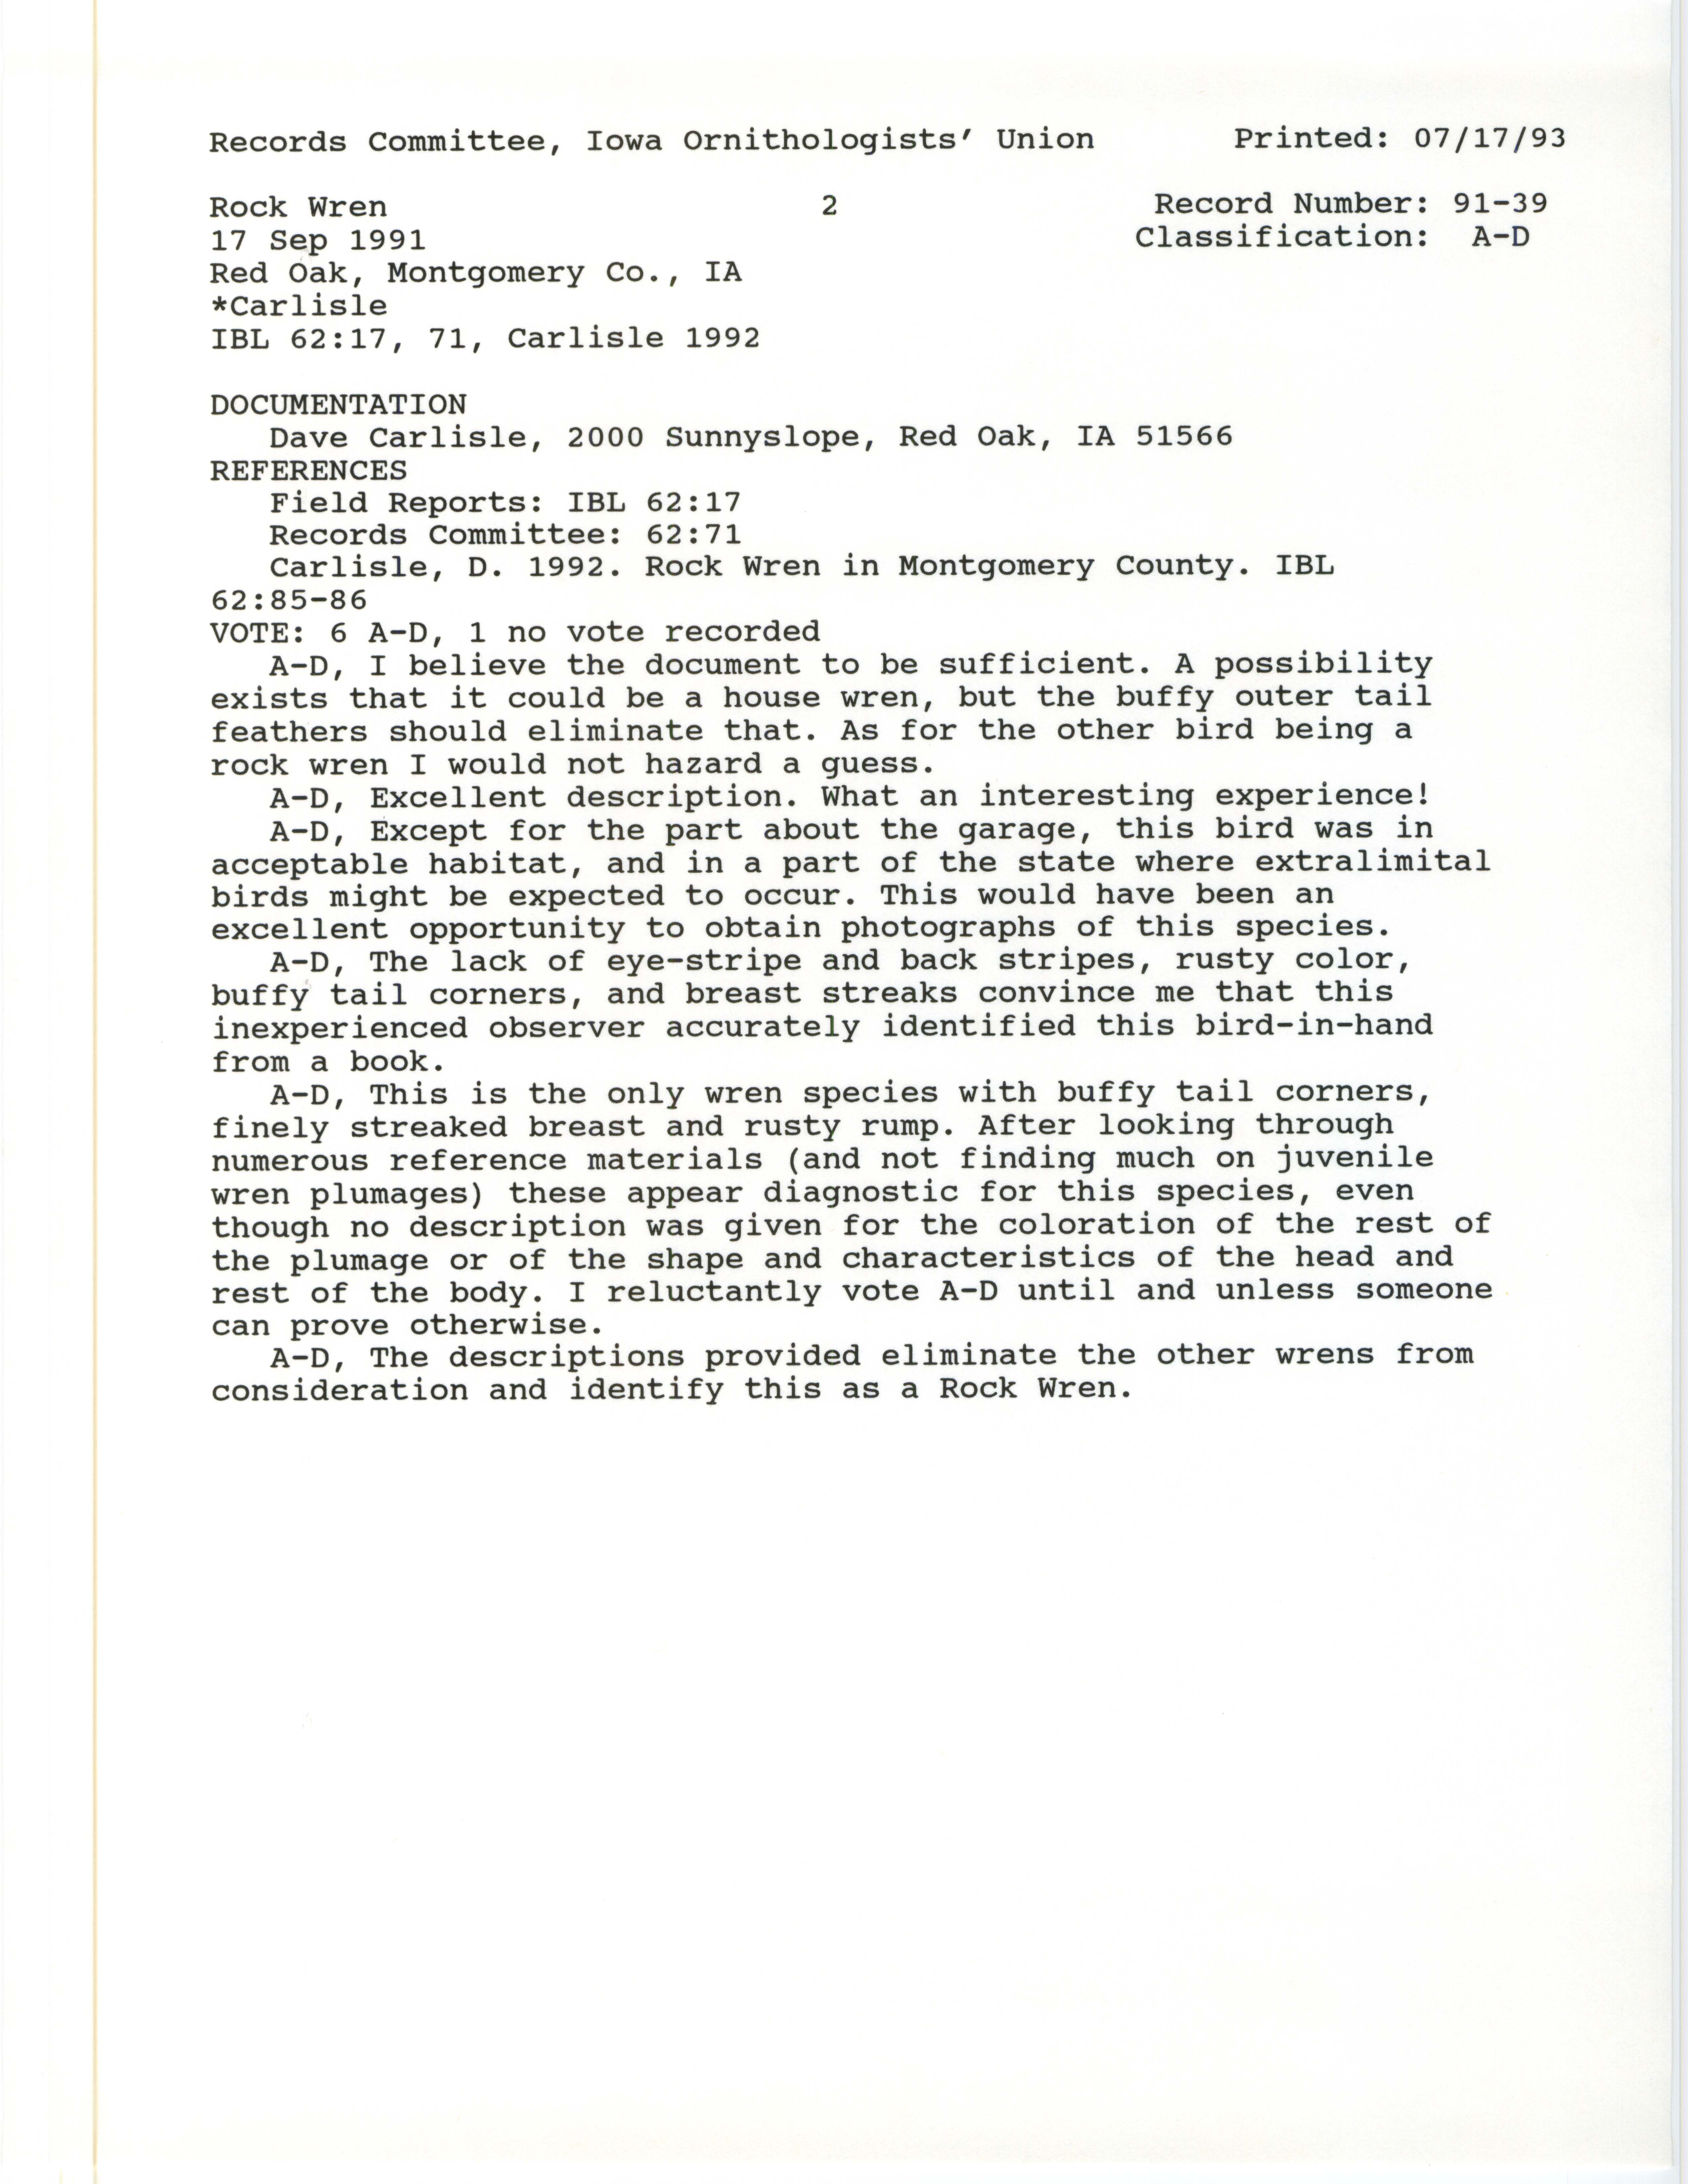 Records Committee review for rare bird sighting for Rock Wren at Red Oak, 1991